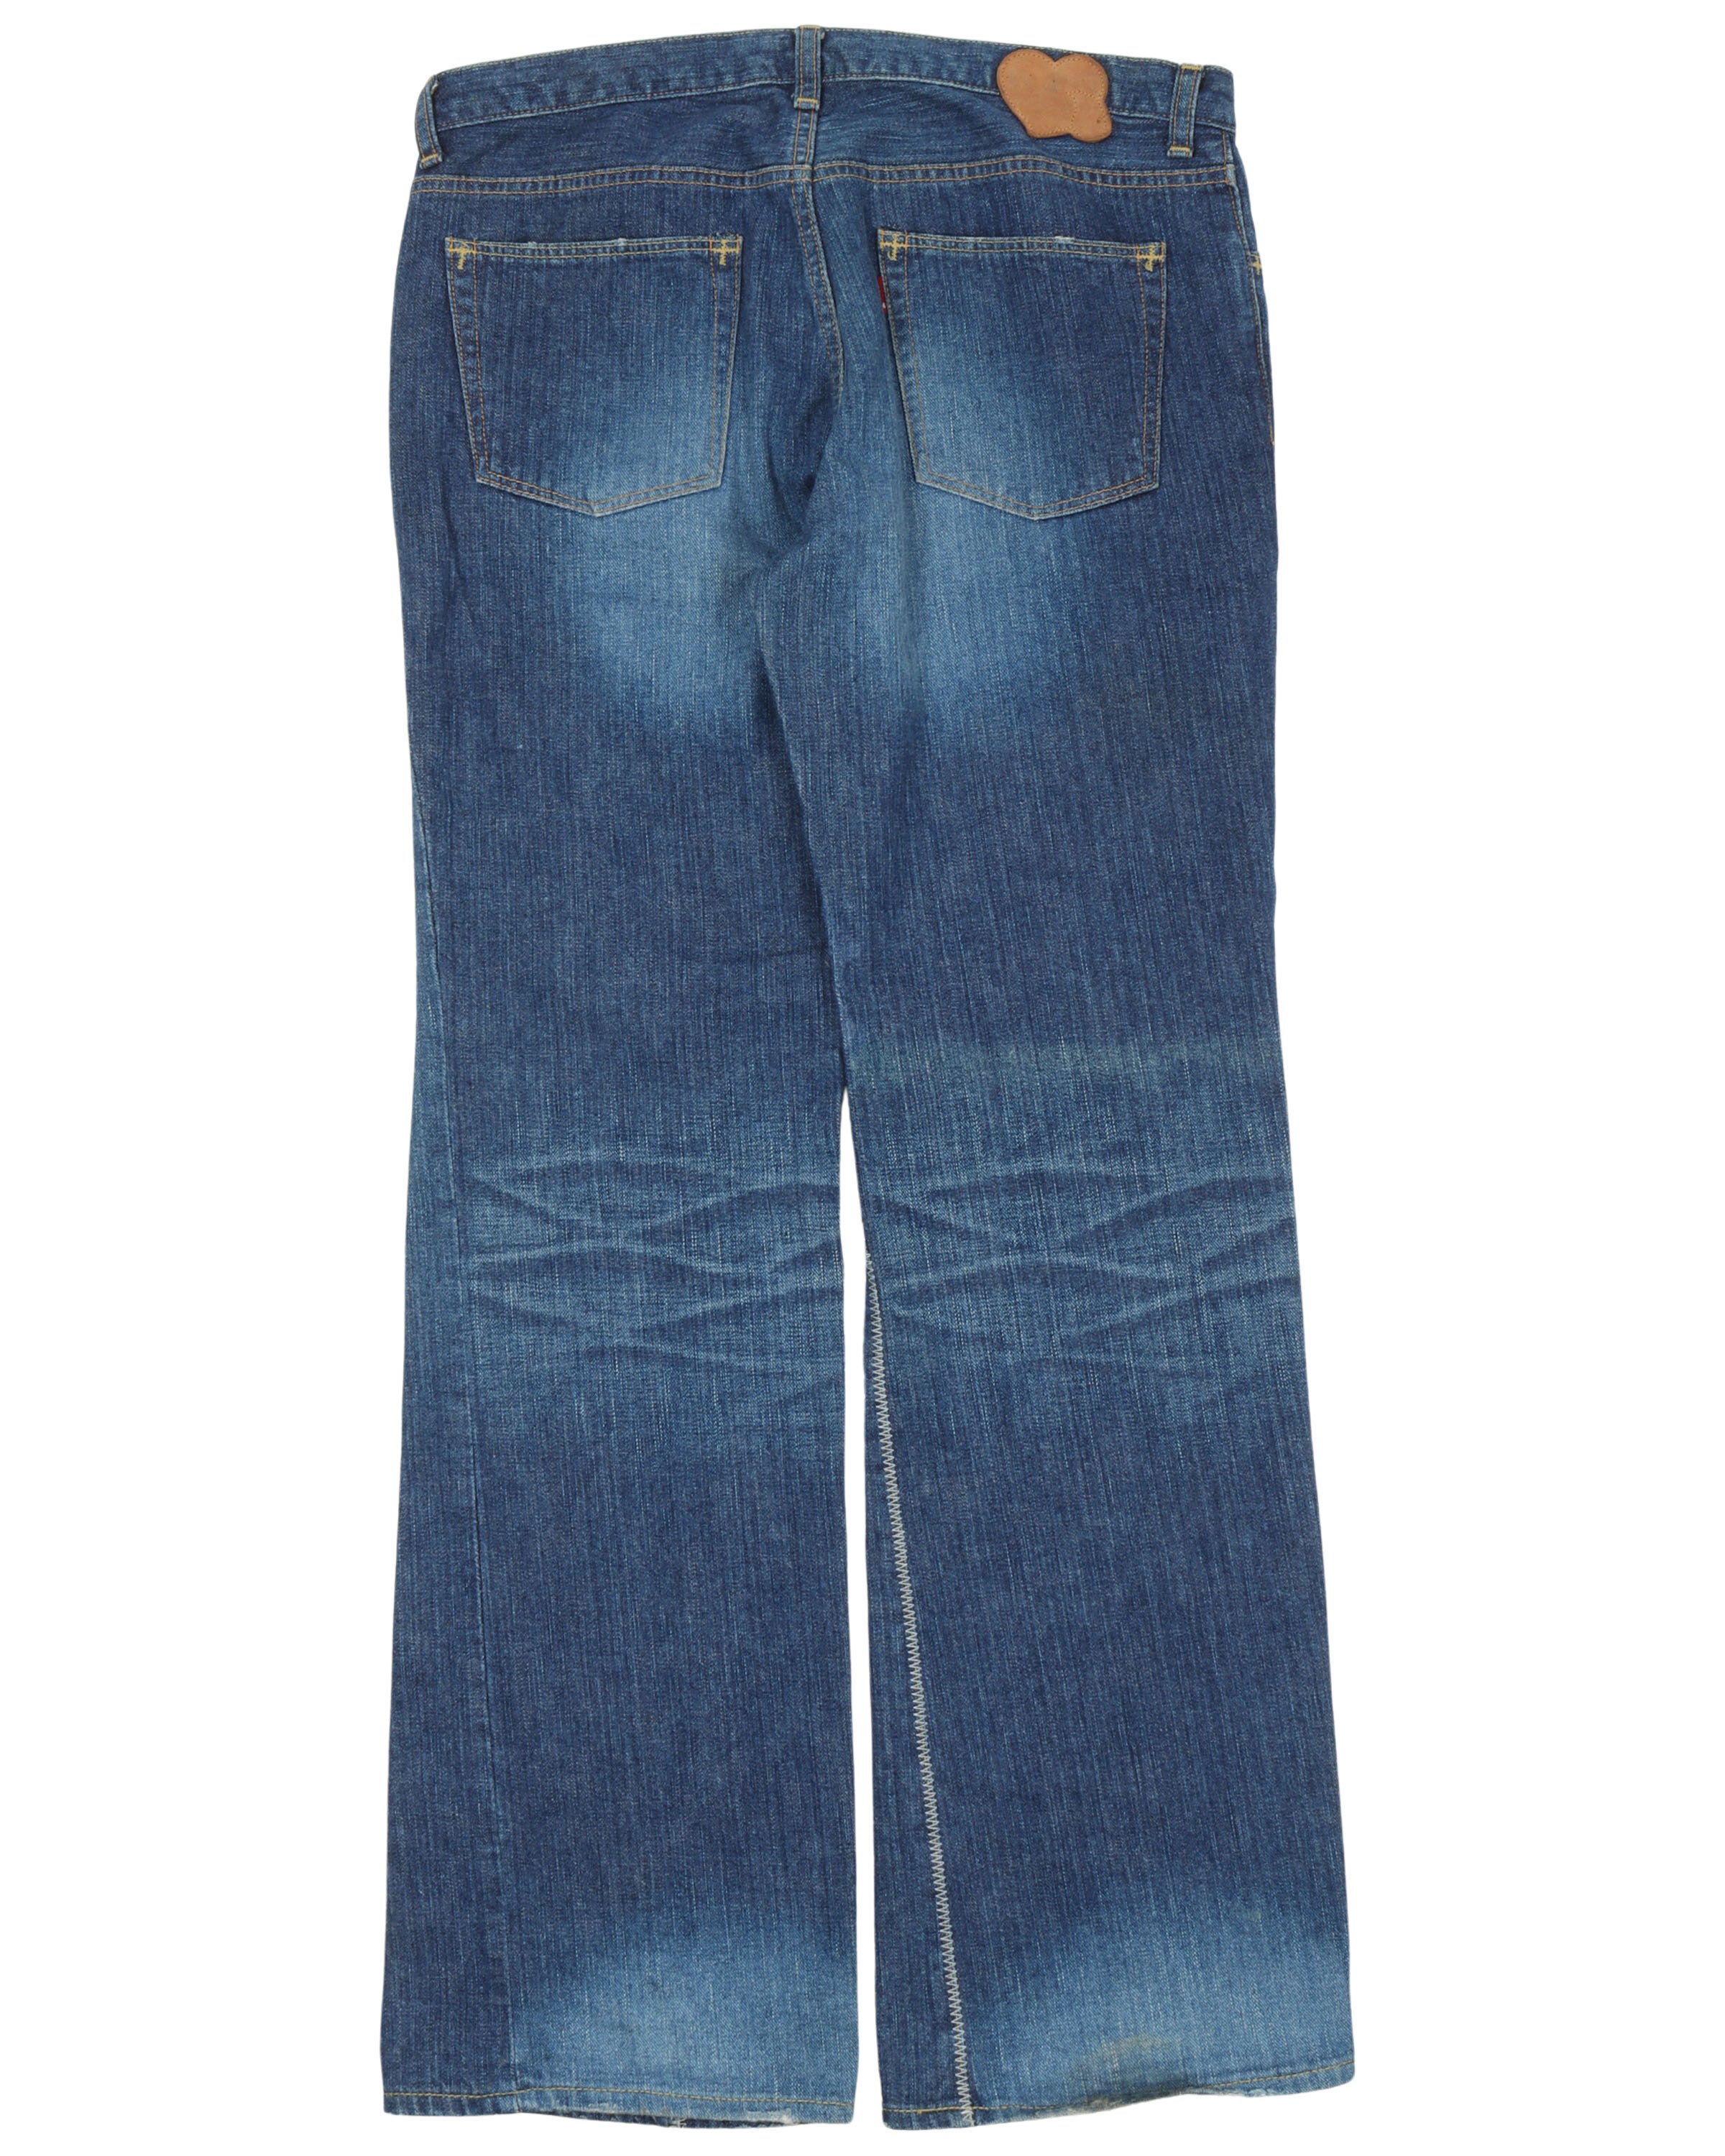 Velvet Patched Jeans